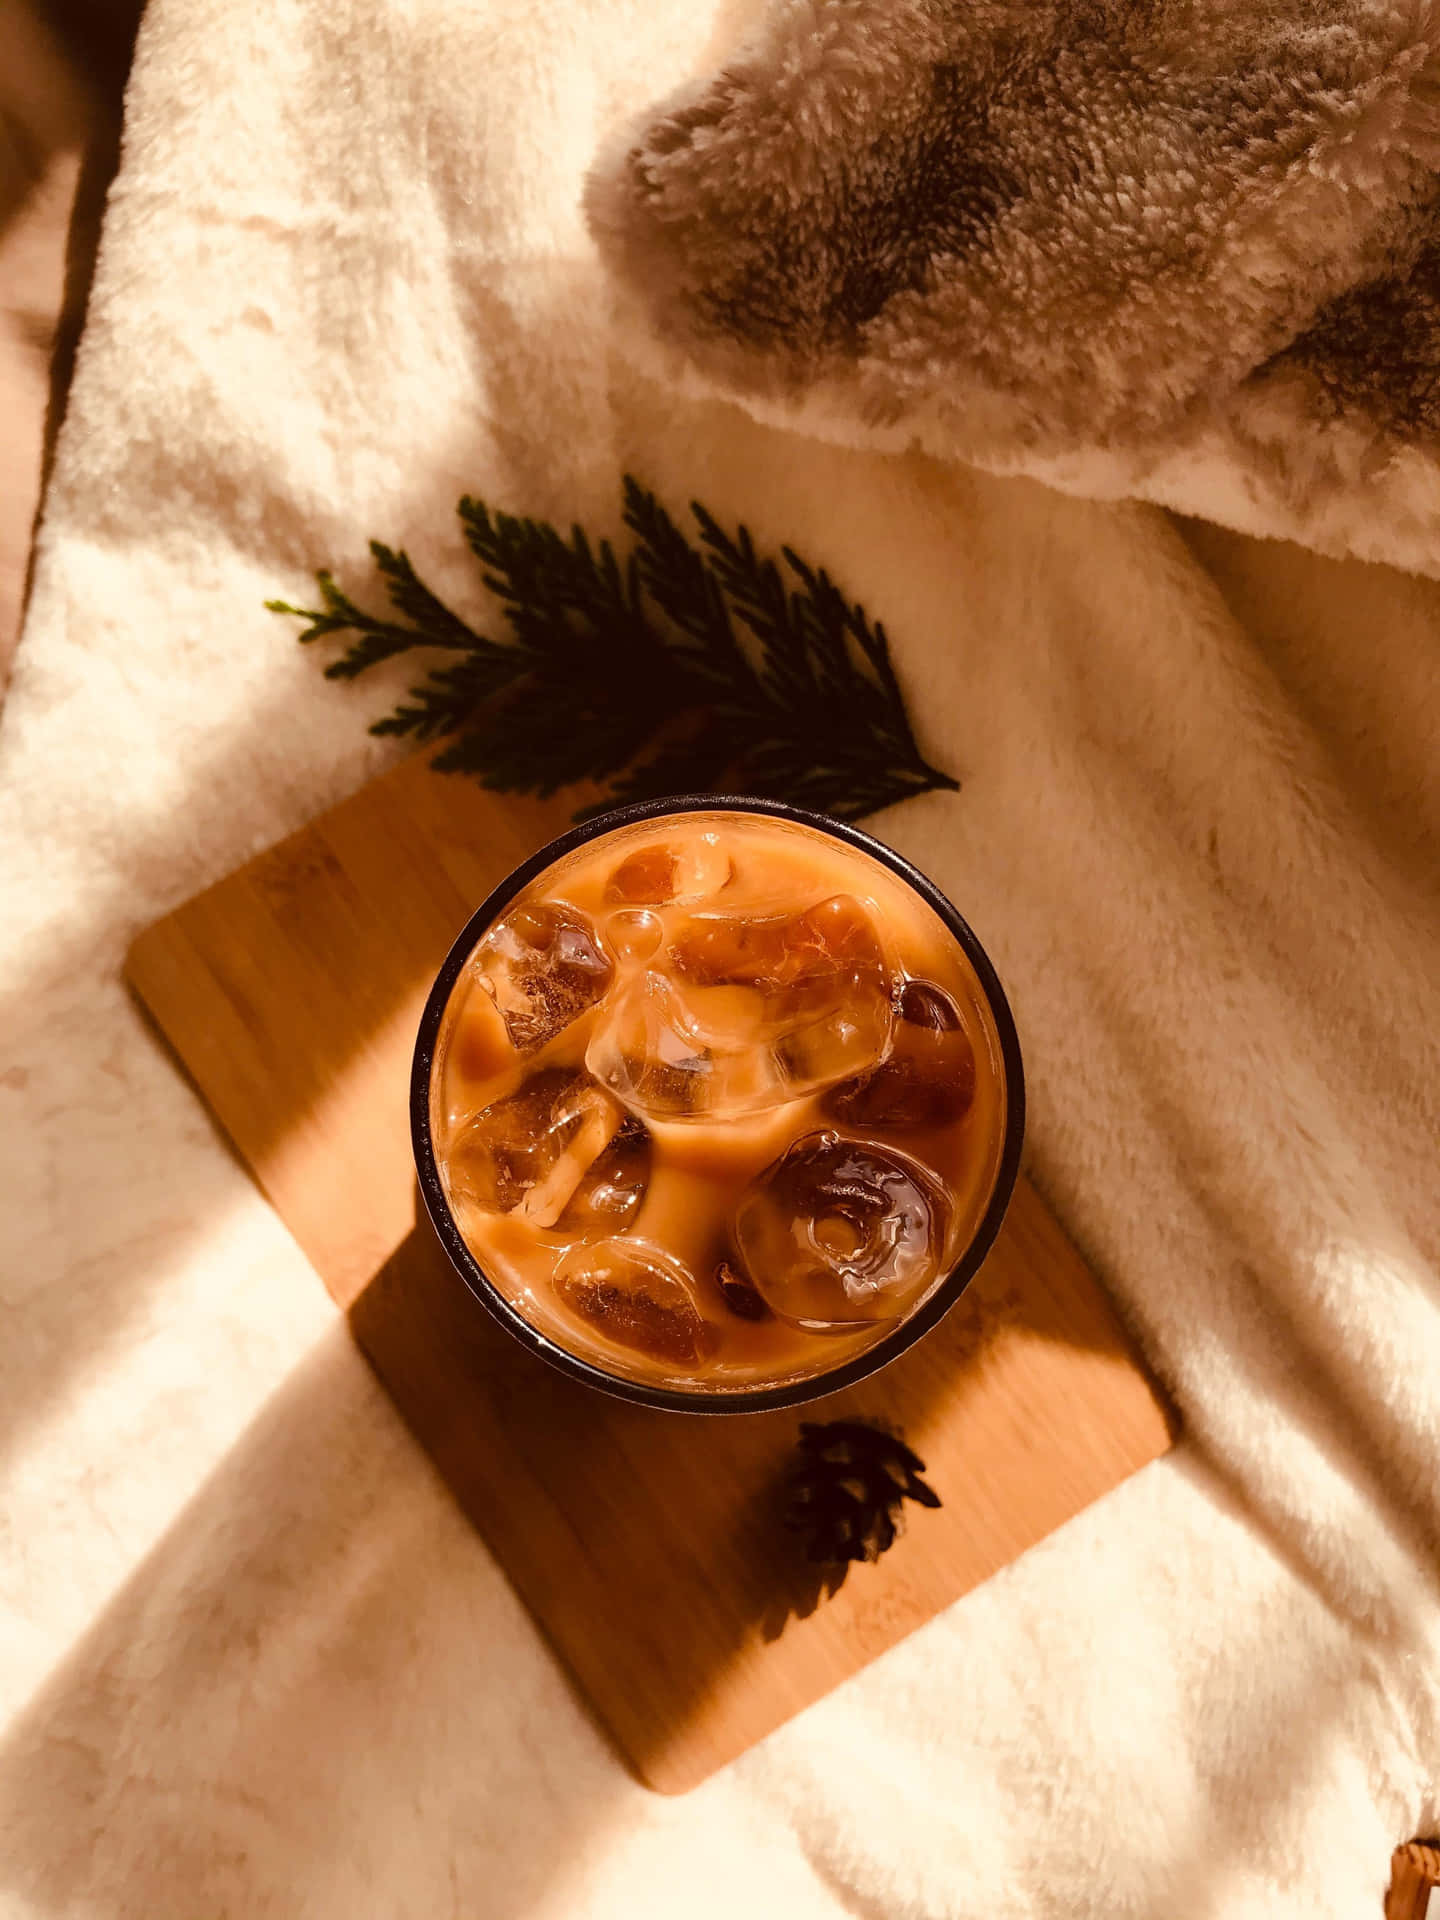 A Cup Of Coffee On A Wooden Board With A Furry Blanket